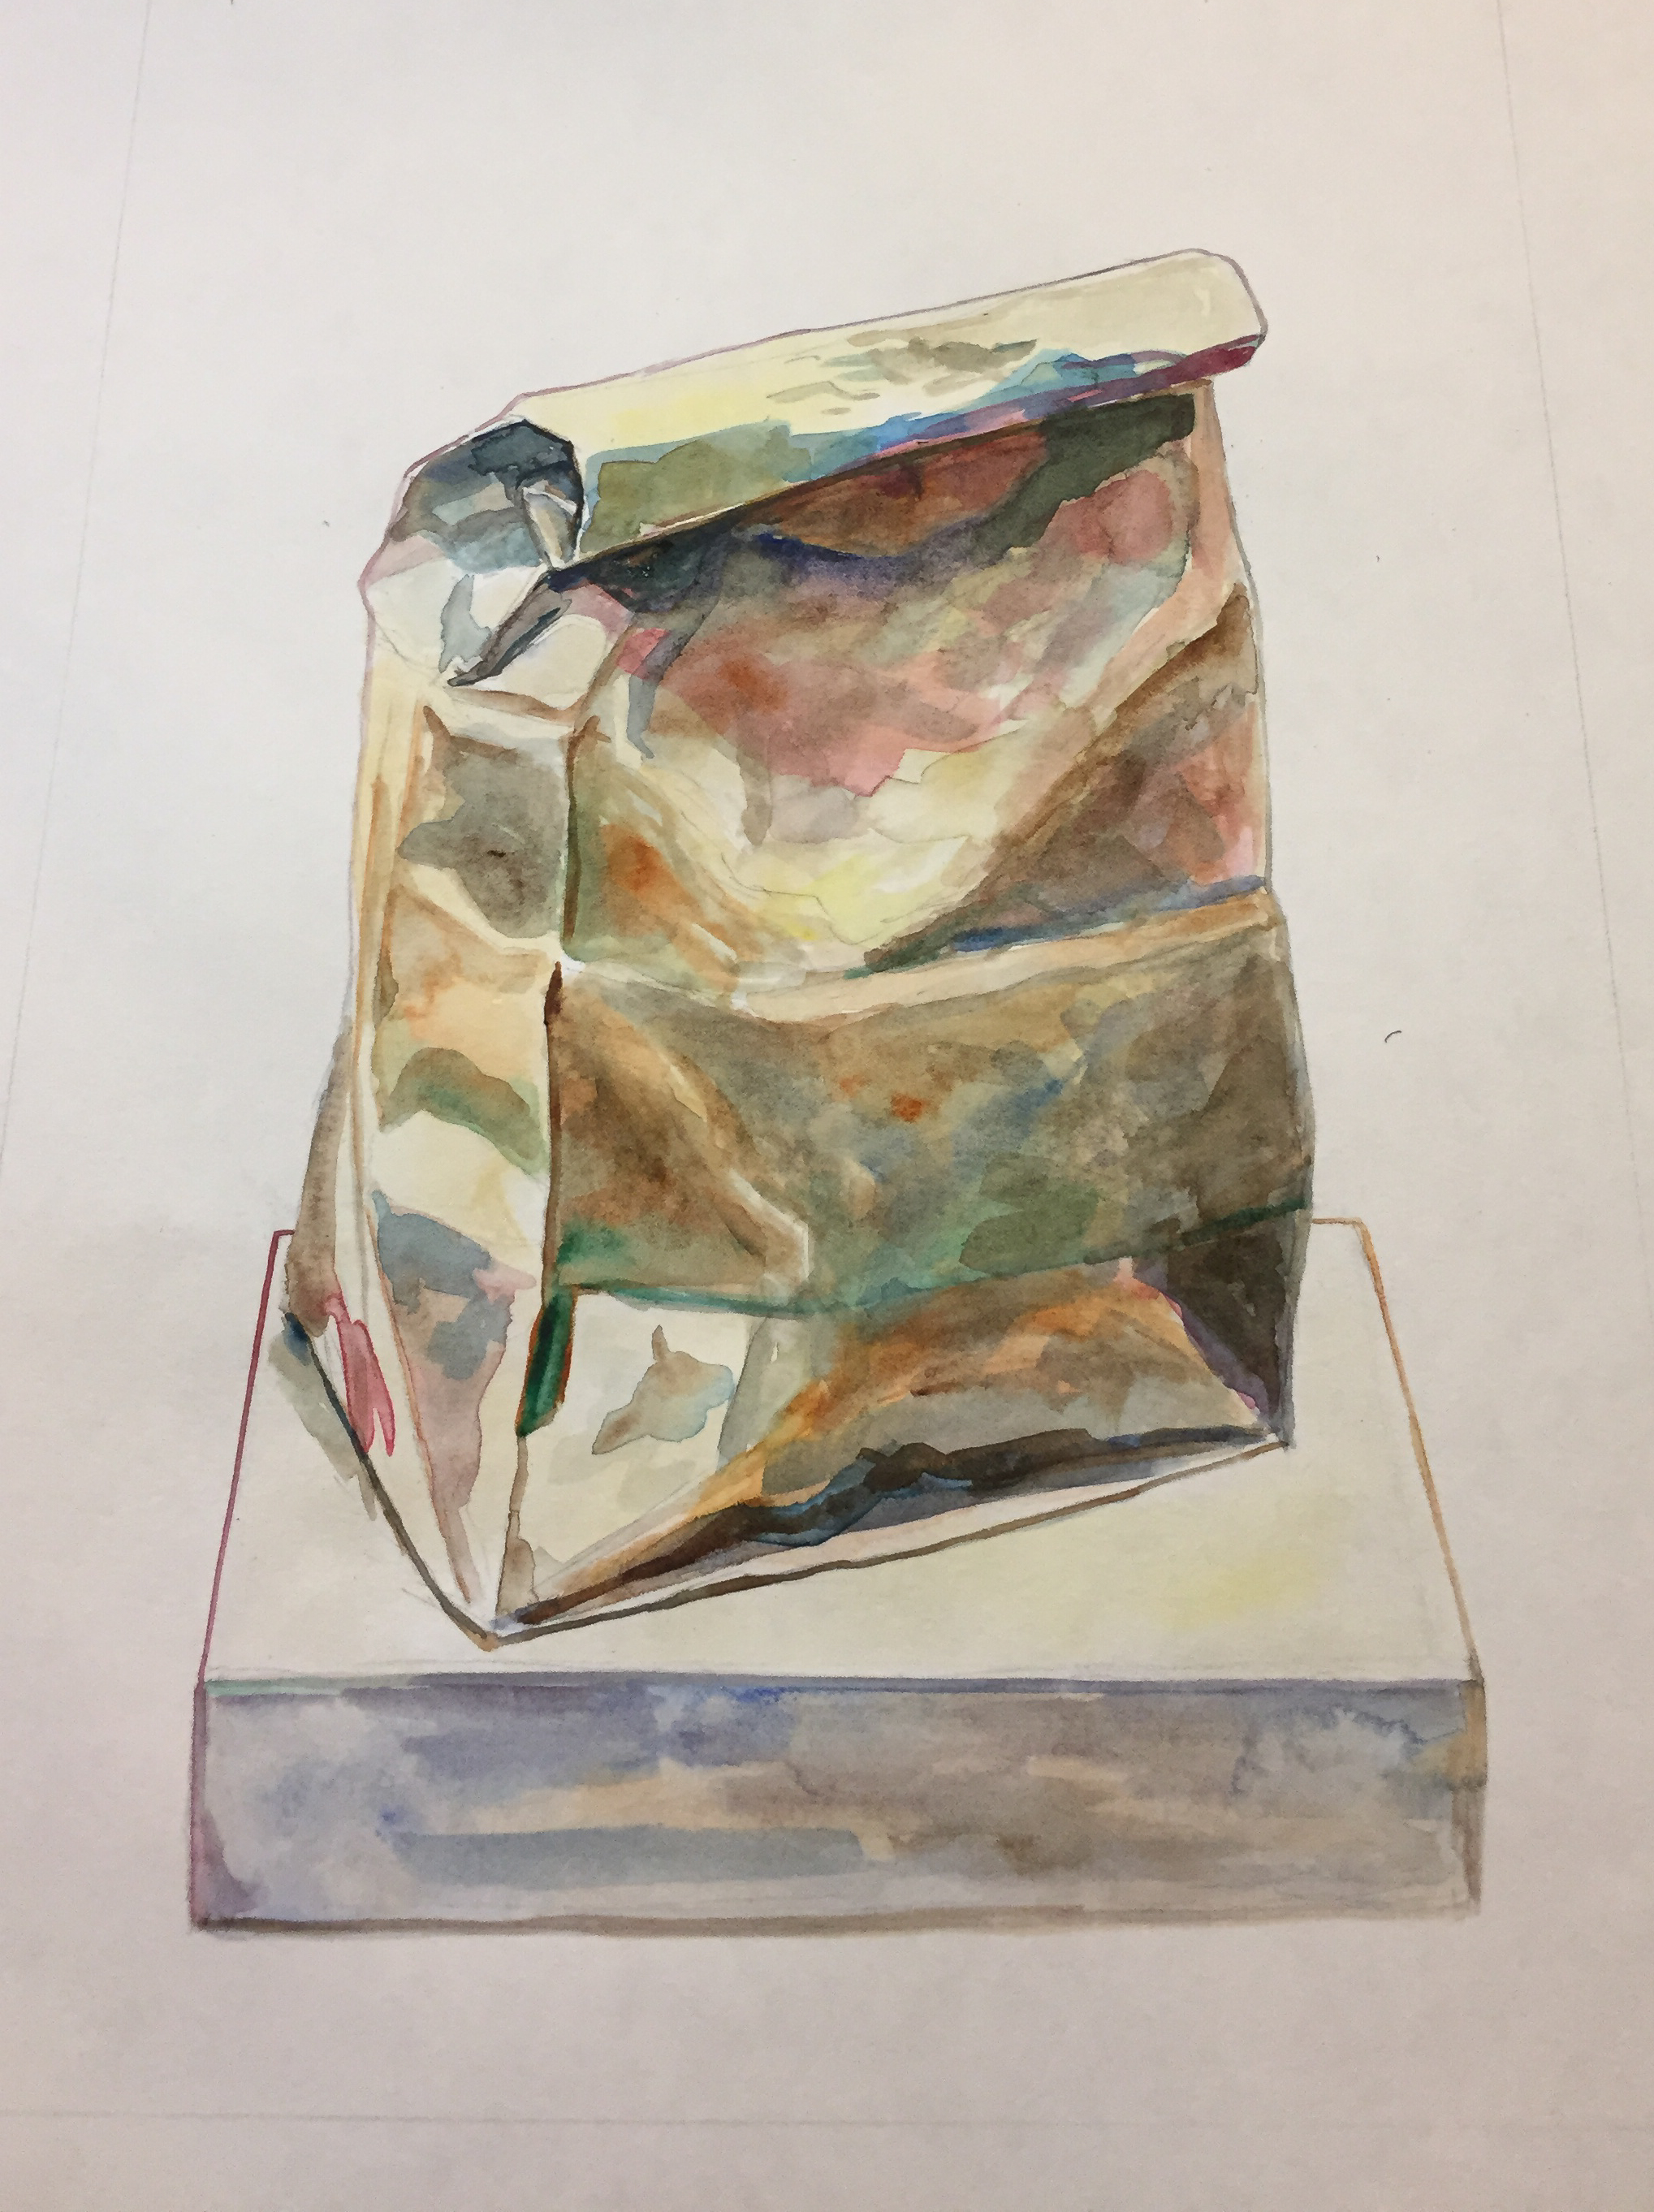 Watercolor painting of a brown paper bag on pedastal